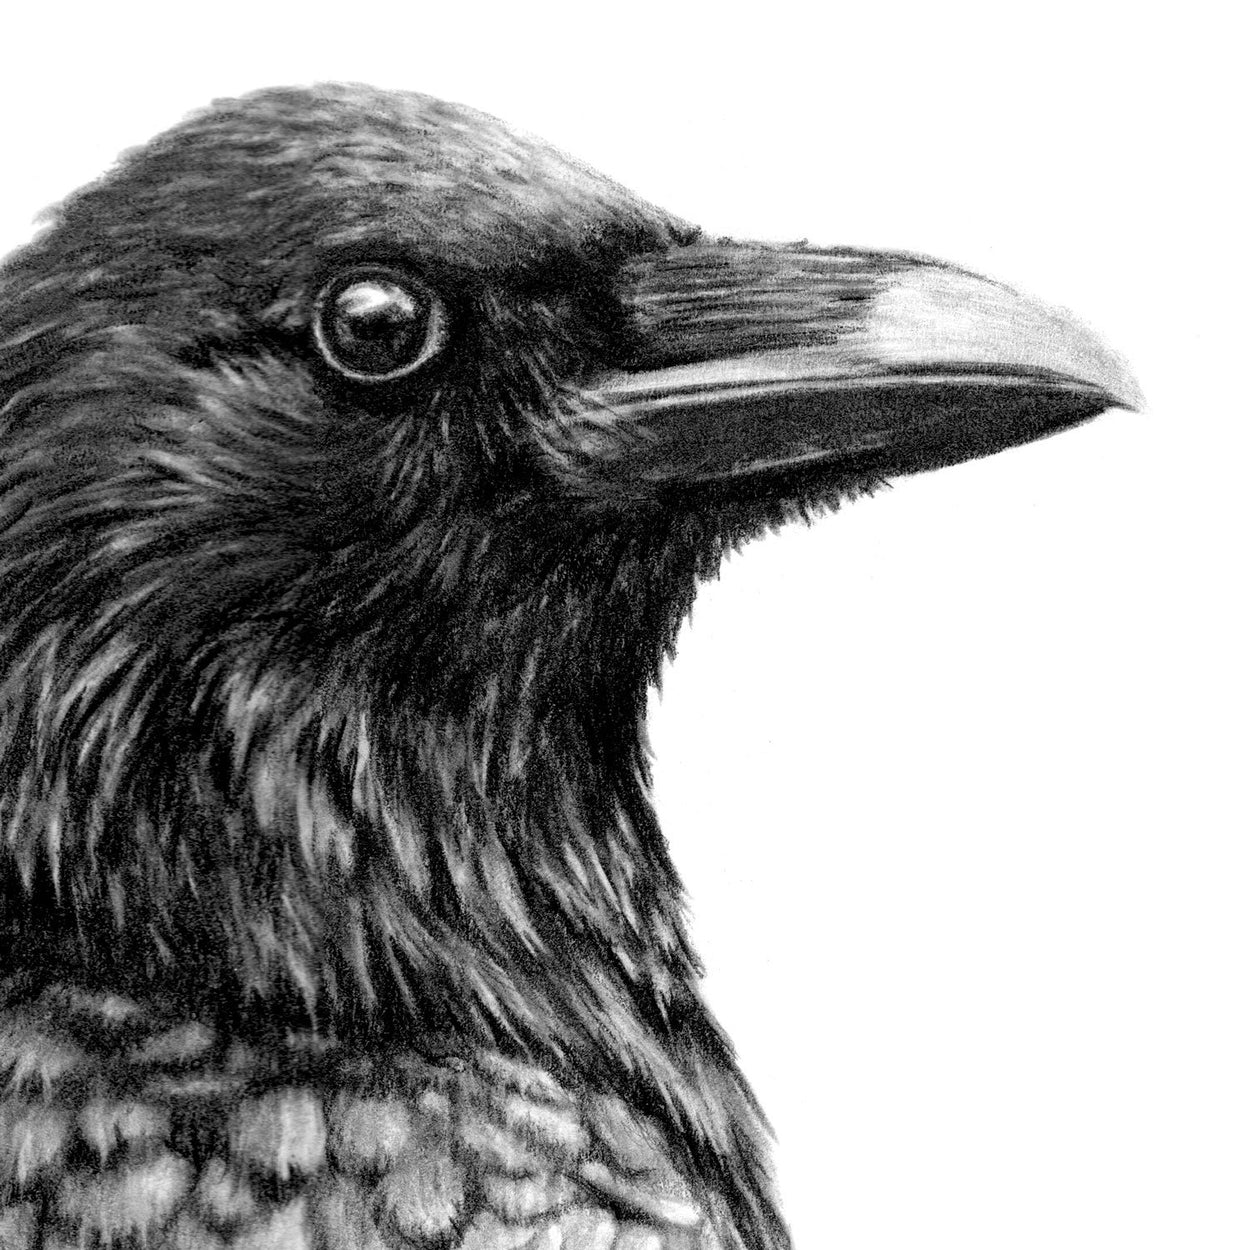 Crow Graphite Close-up - The Thriving Wild